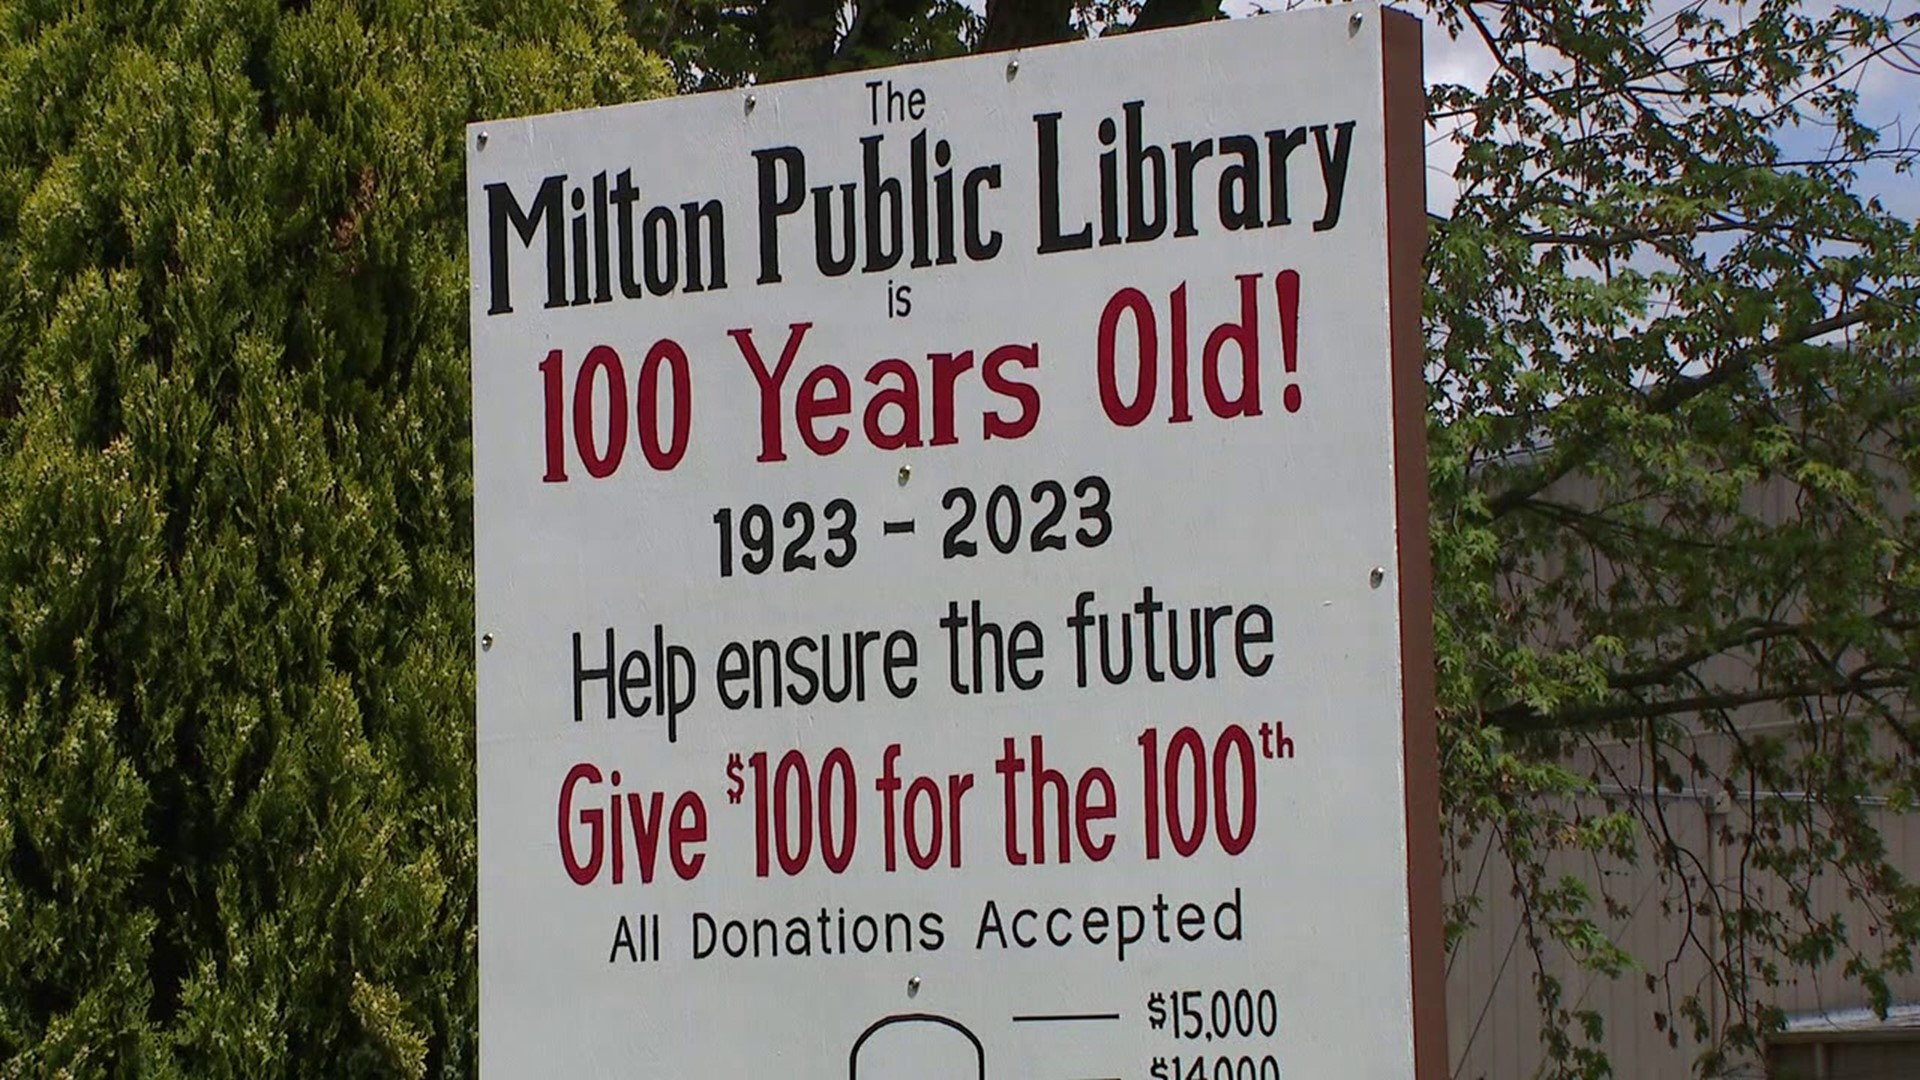 The Milton Public Library is trying to raise $100,000 in honor of its 100th-year milestone.